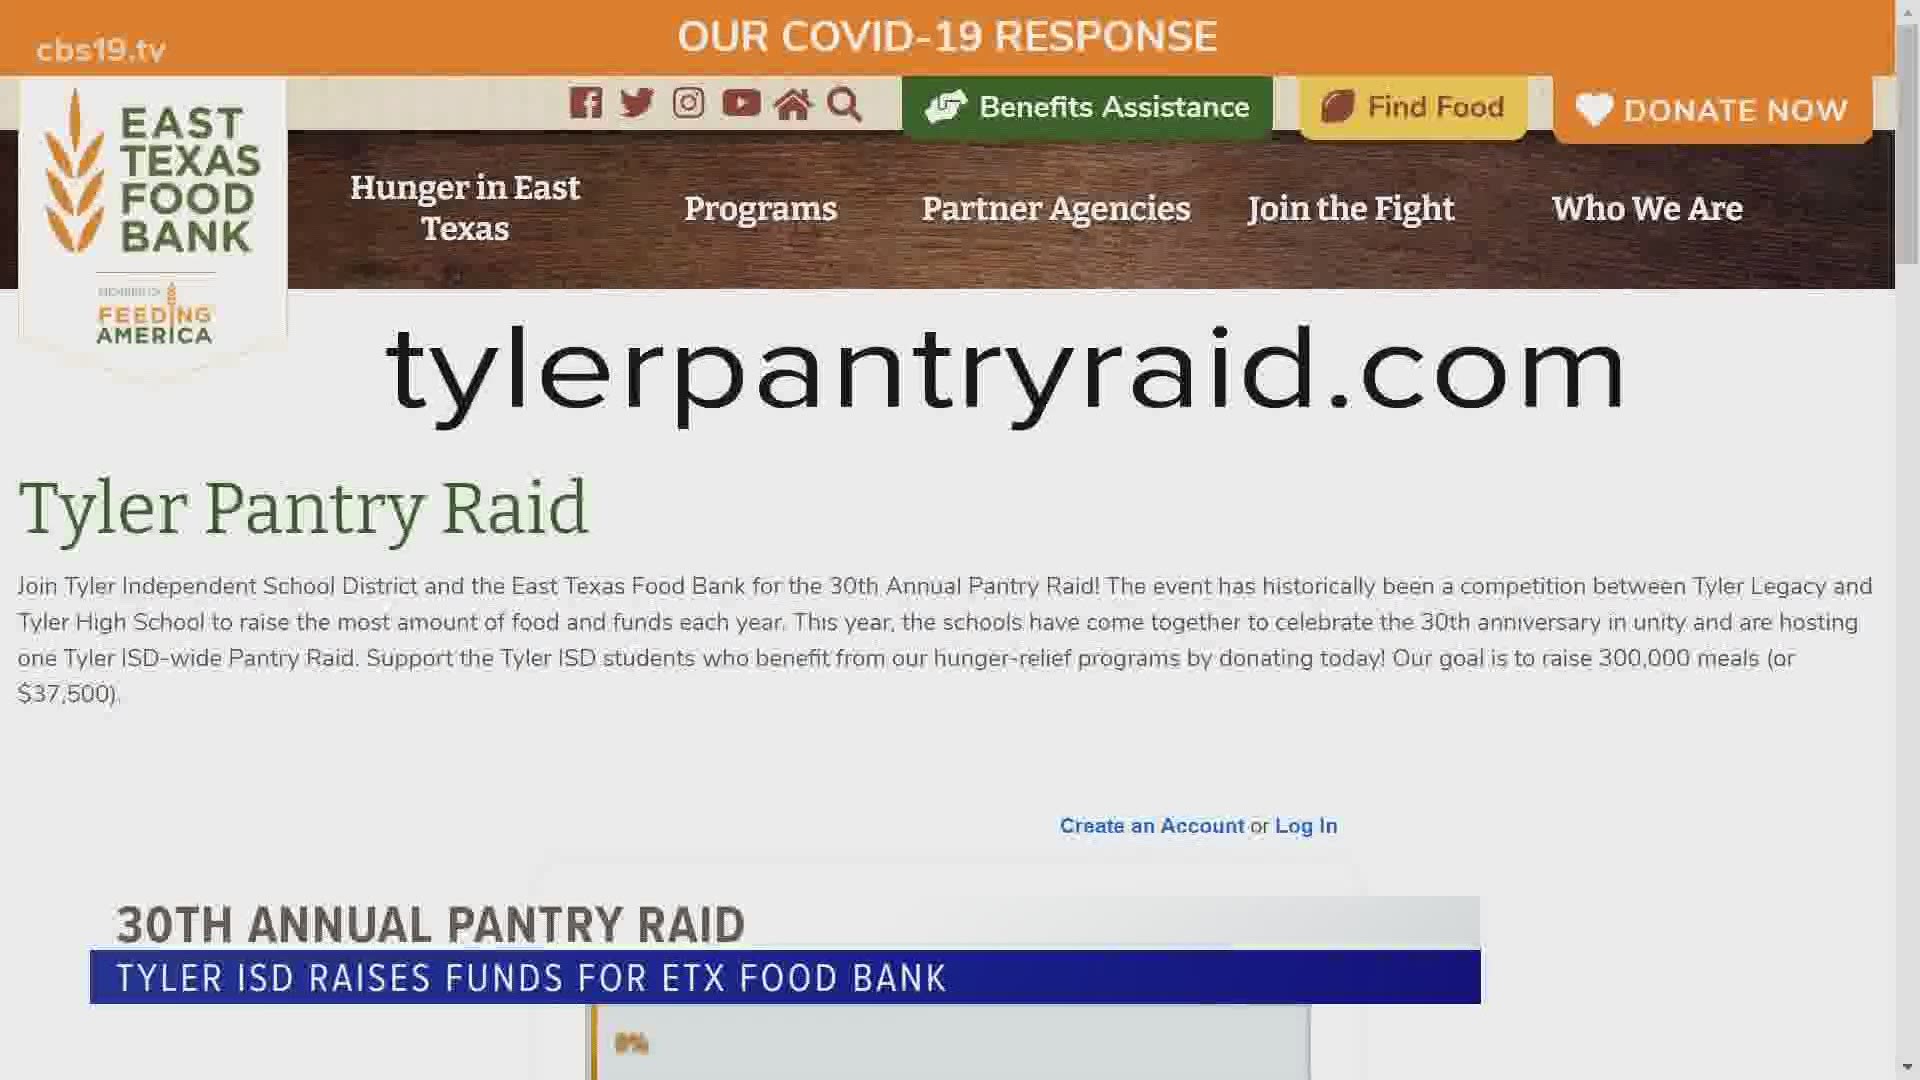 If you want to participate you can go to Tylerpantryraid.com and donate. It will run until October 2.